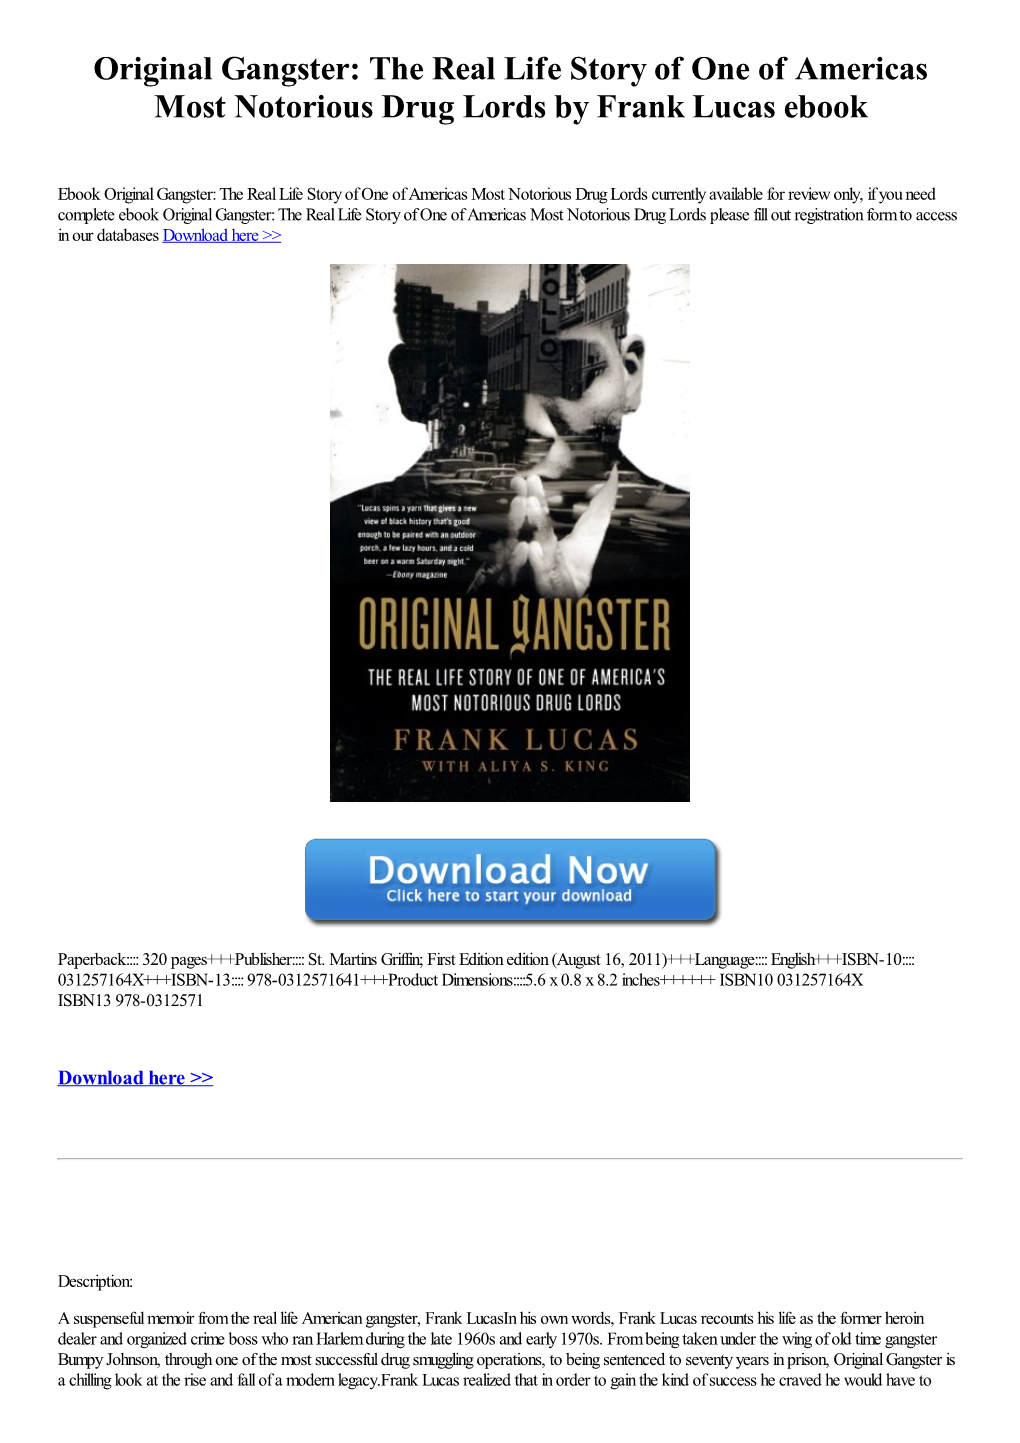 Original Gangster: the Real Life Story of One of Americas Most Notorious Drug Lords by Frank Lucas Ebook